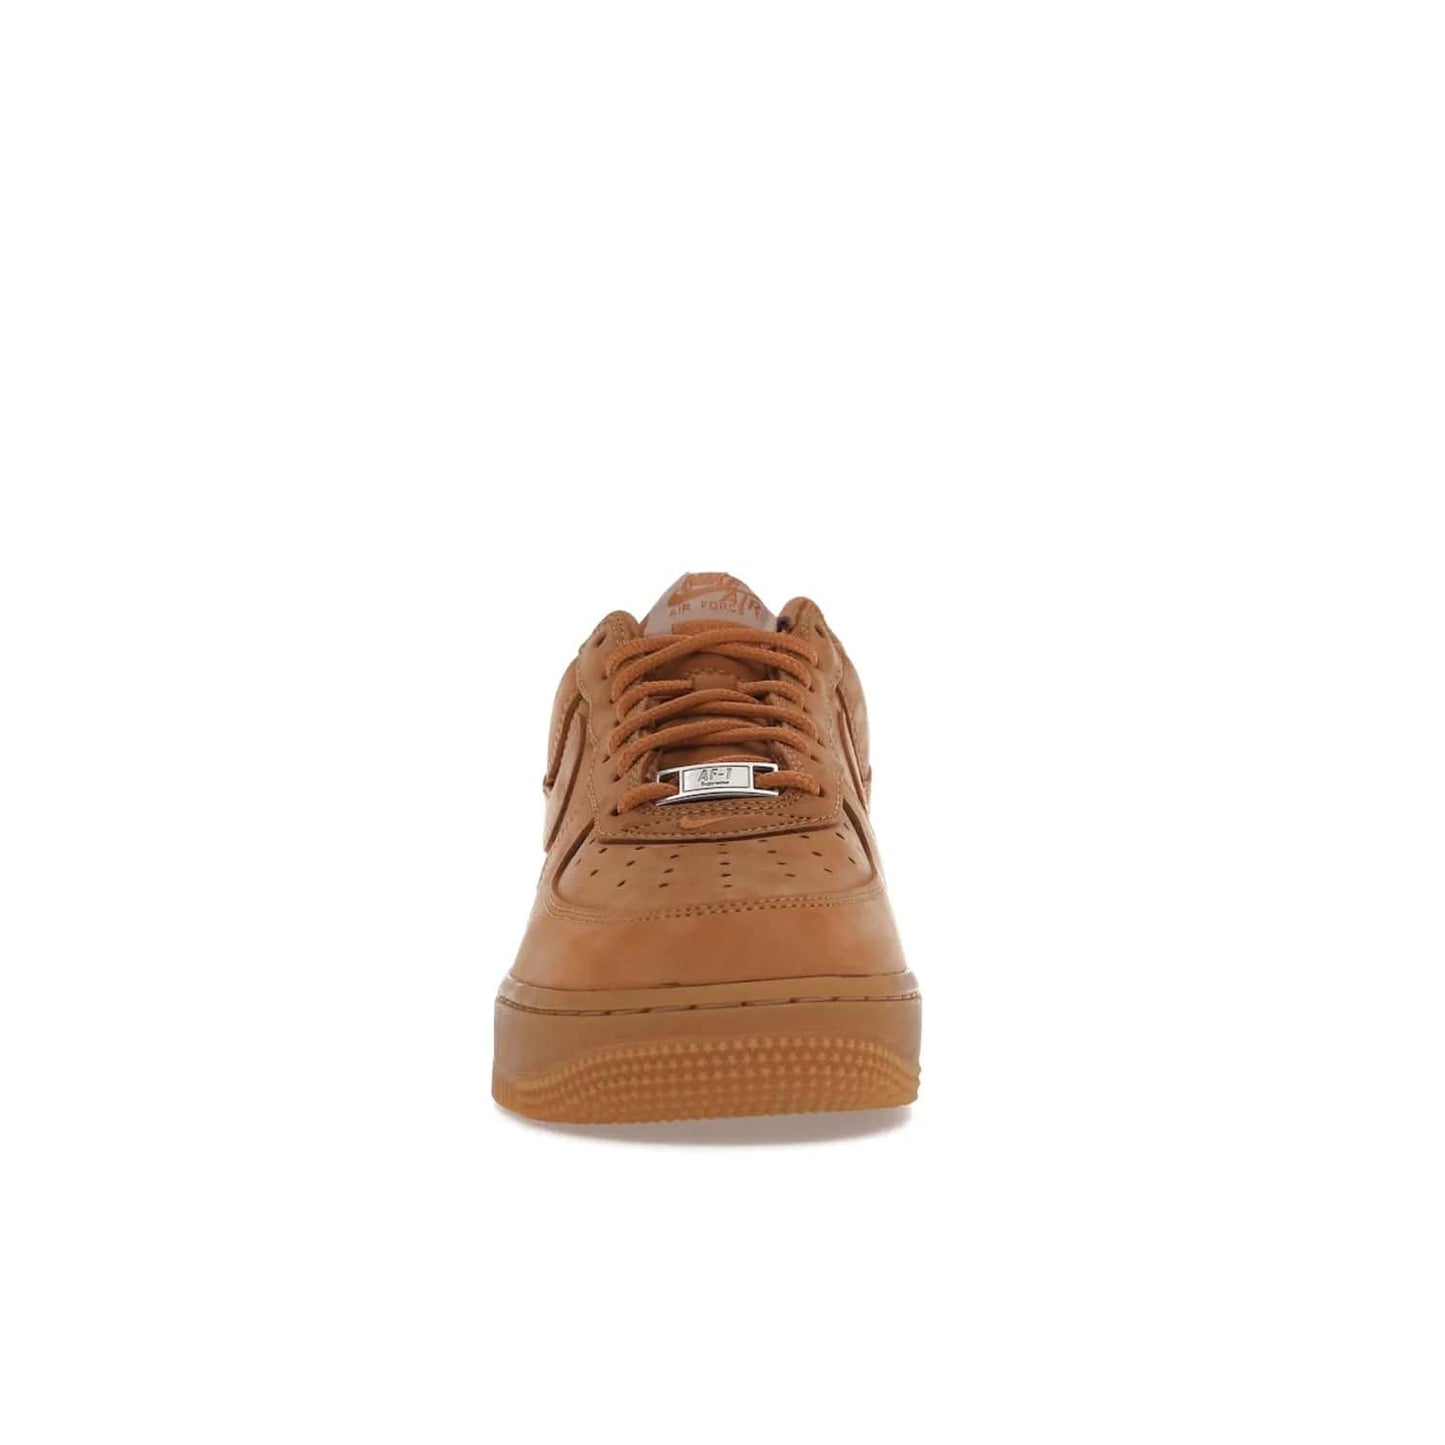 Nike Air Force 1 Low SP Supreme Wheat - Image 10 - Only at www.BallersClubKickz.com - A luxe Flax Durabuck upper and Supreme Box Logo insignias on the lateral heels make the Nike Air Force 1 Low SP Supreme Wheat a stylish lifestyle shoe. Matching Flax Air sole adds a classic touch to this collaboration between Nike and Supreme. Make a statement with this edition of the classic Air Force 1 Low.